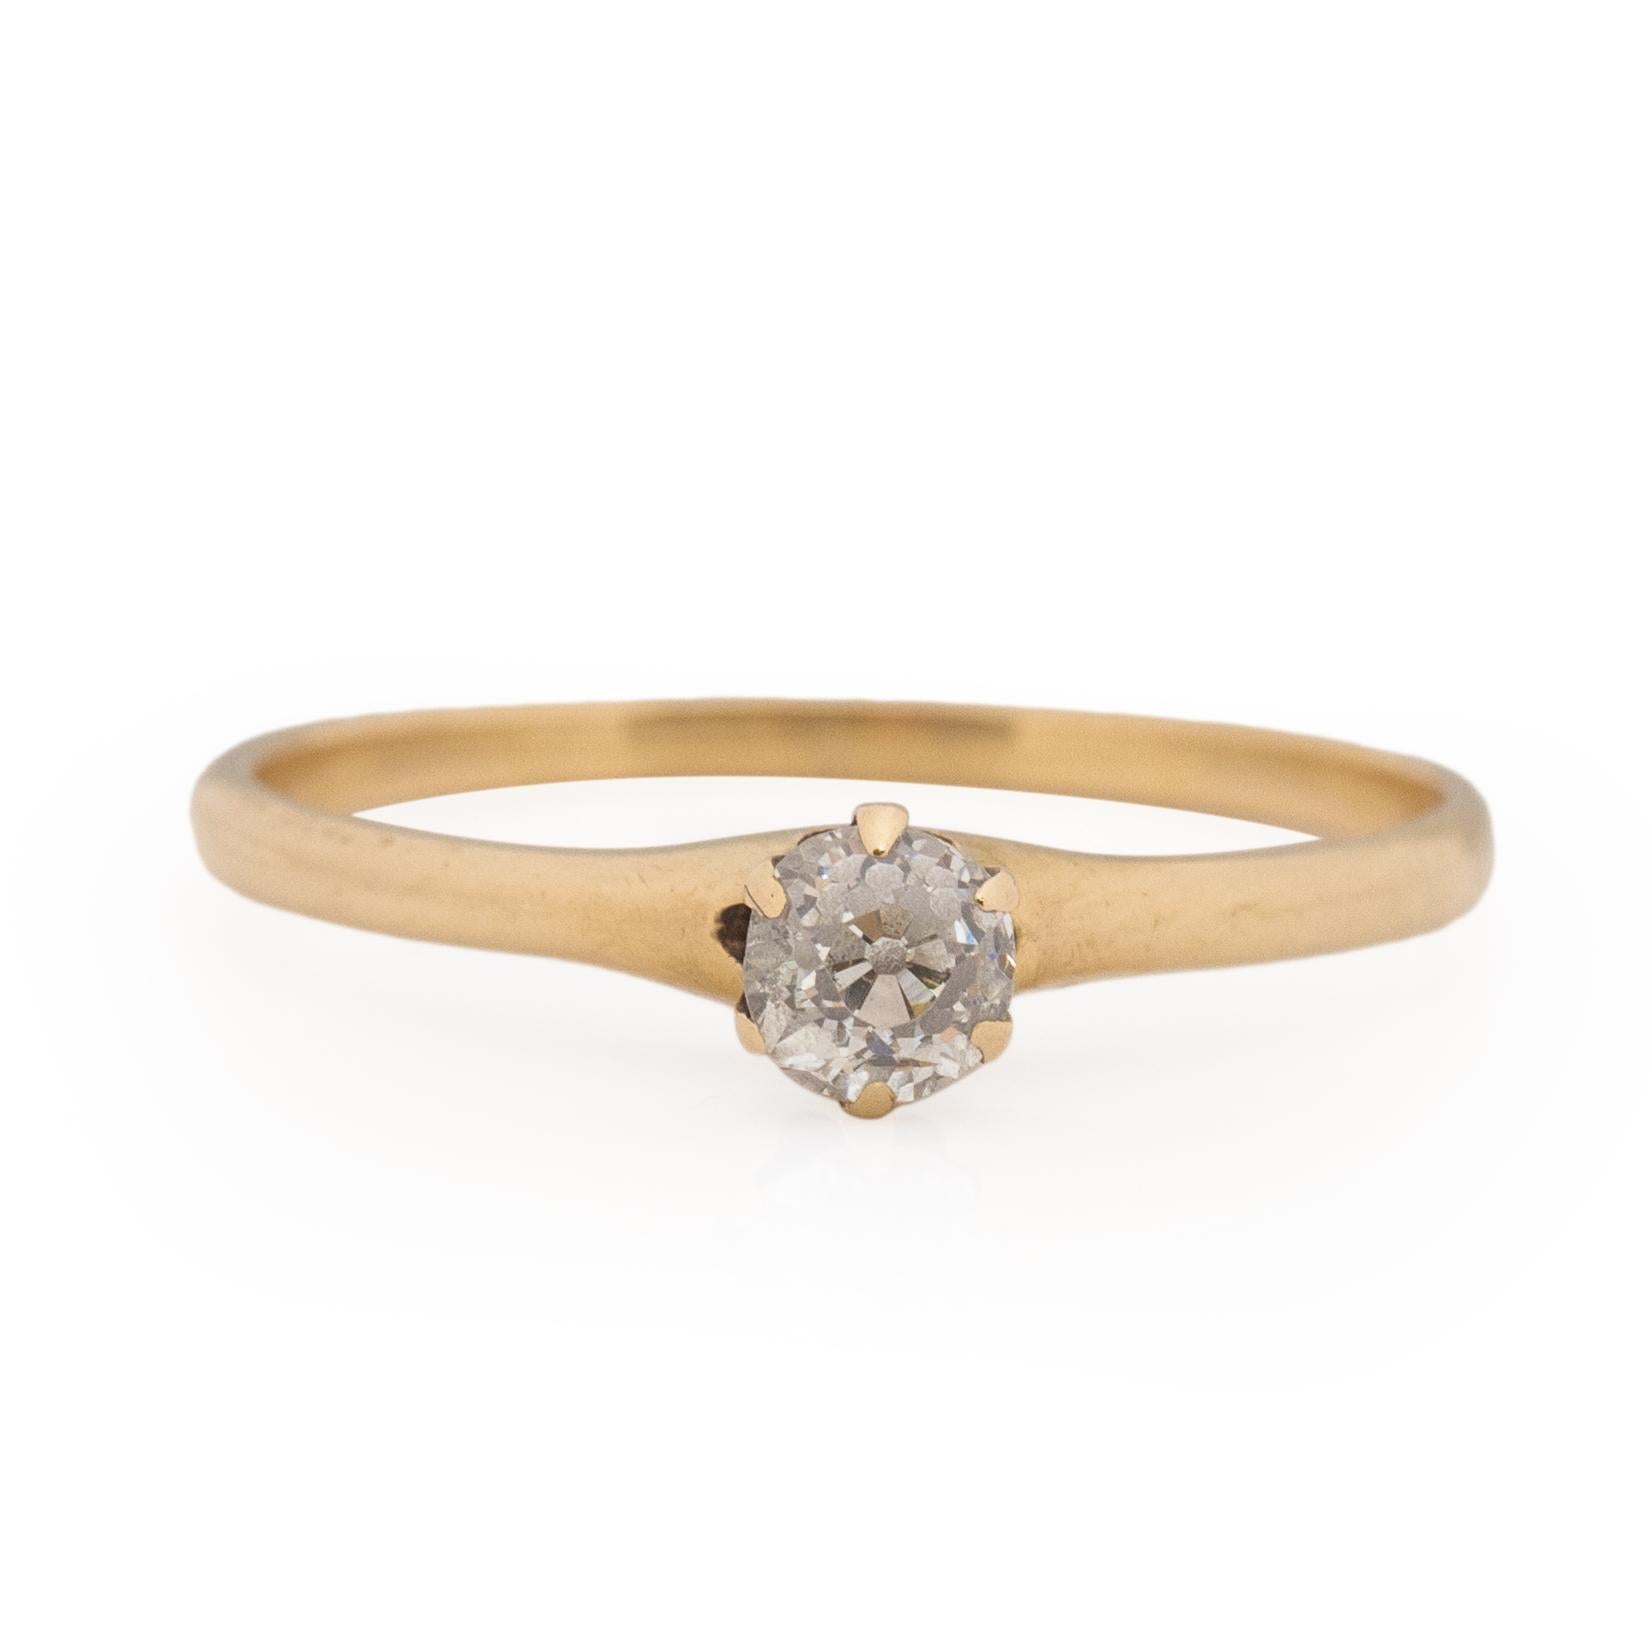 This classic beauty is a true timeless piece. Strait from the Victorian era this 14K yellow gold six prong solitaire is in outstanding condition with alot of life left to give. This beauty has a simple elegance that is versatile. The clean design